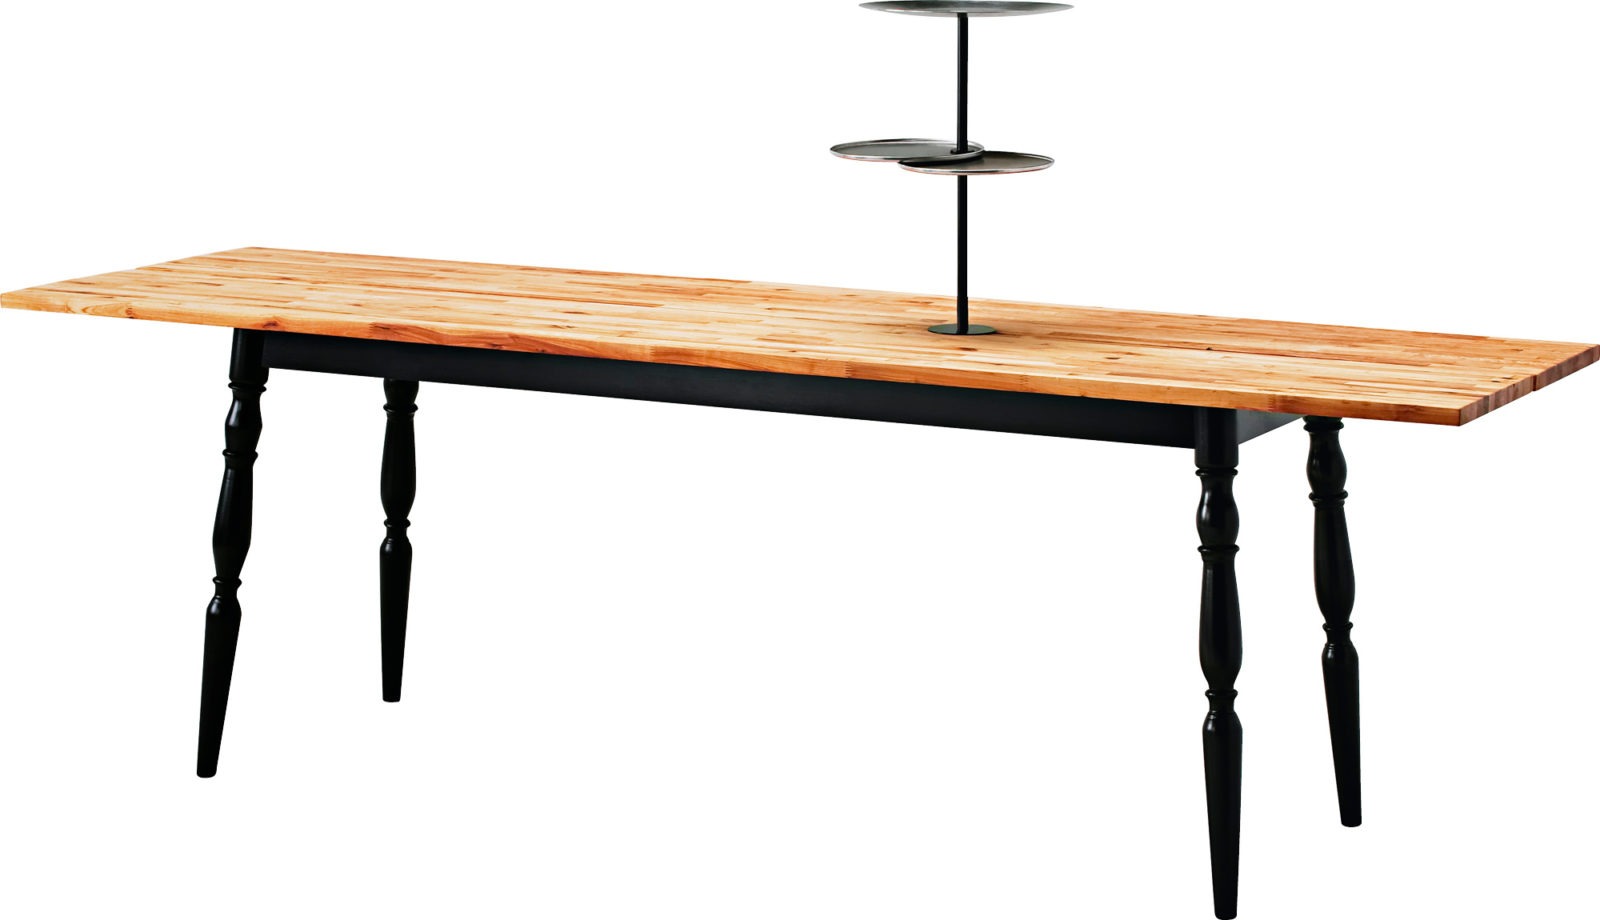 Dining table with a top in solid oiled wood with a tray stand and black turned legs.